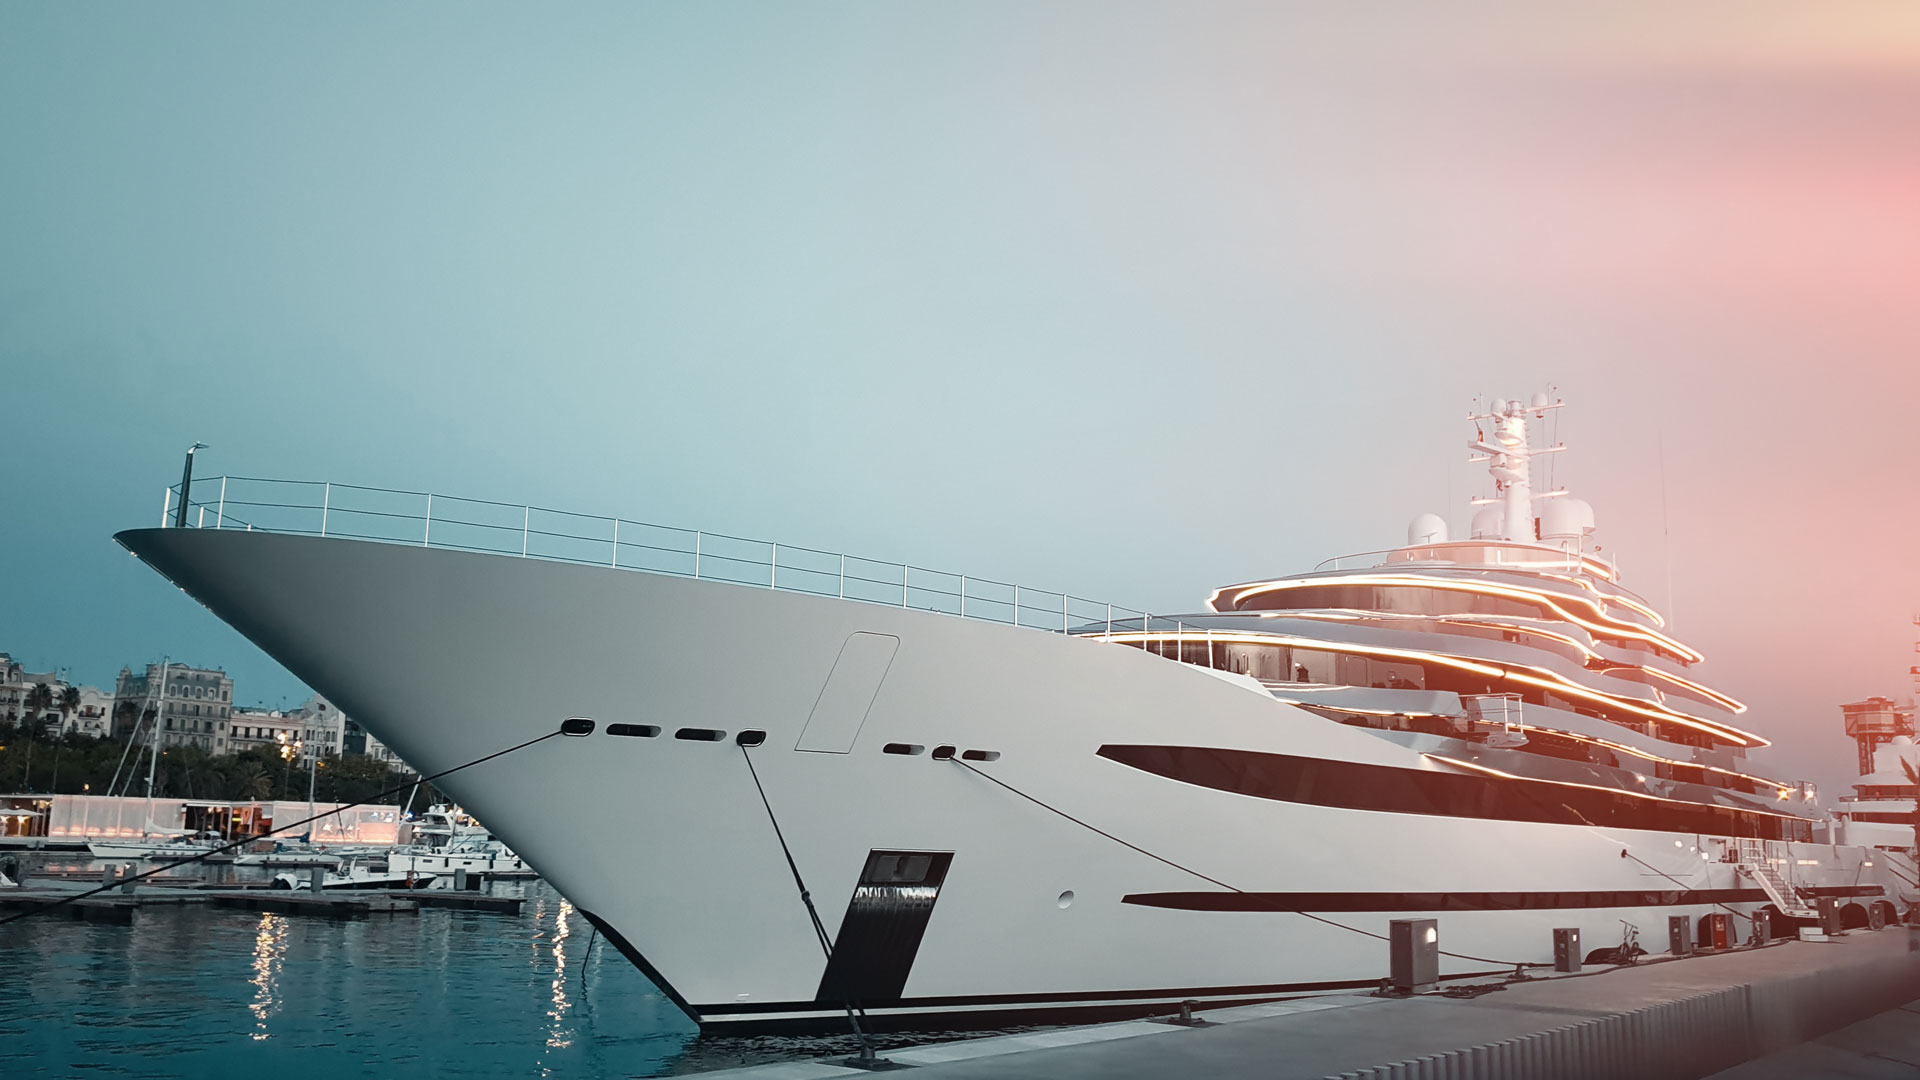 Large, stylish private superyacht moored in a European port.